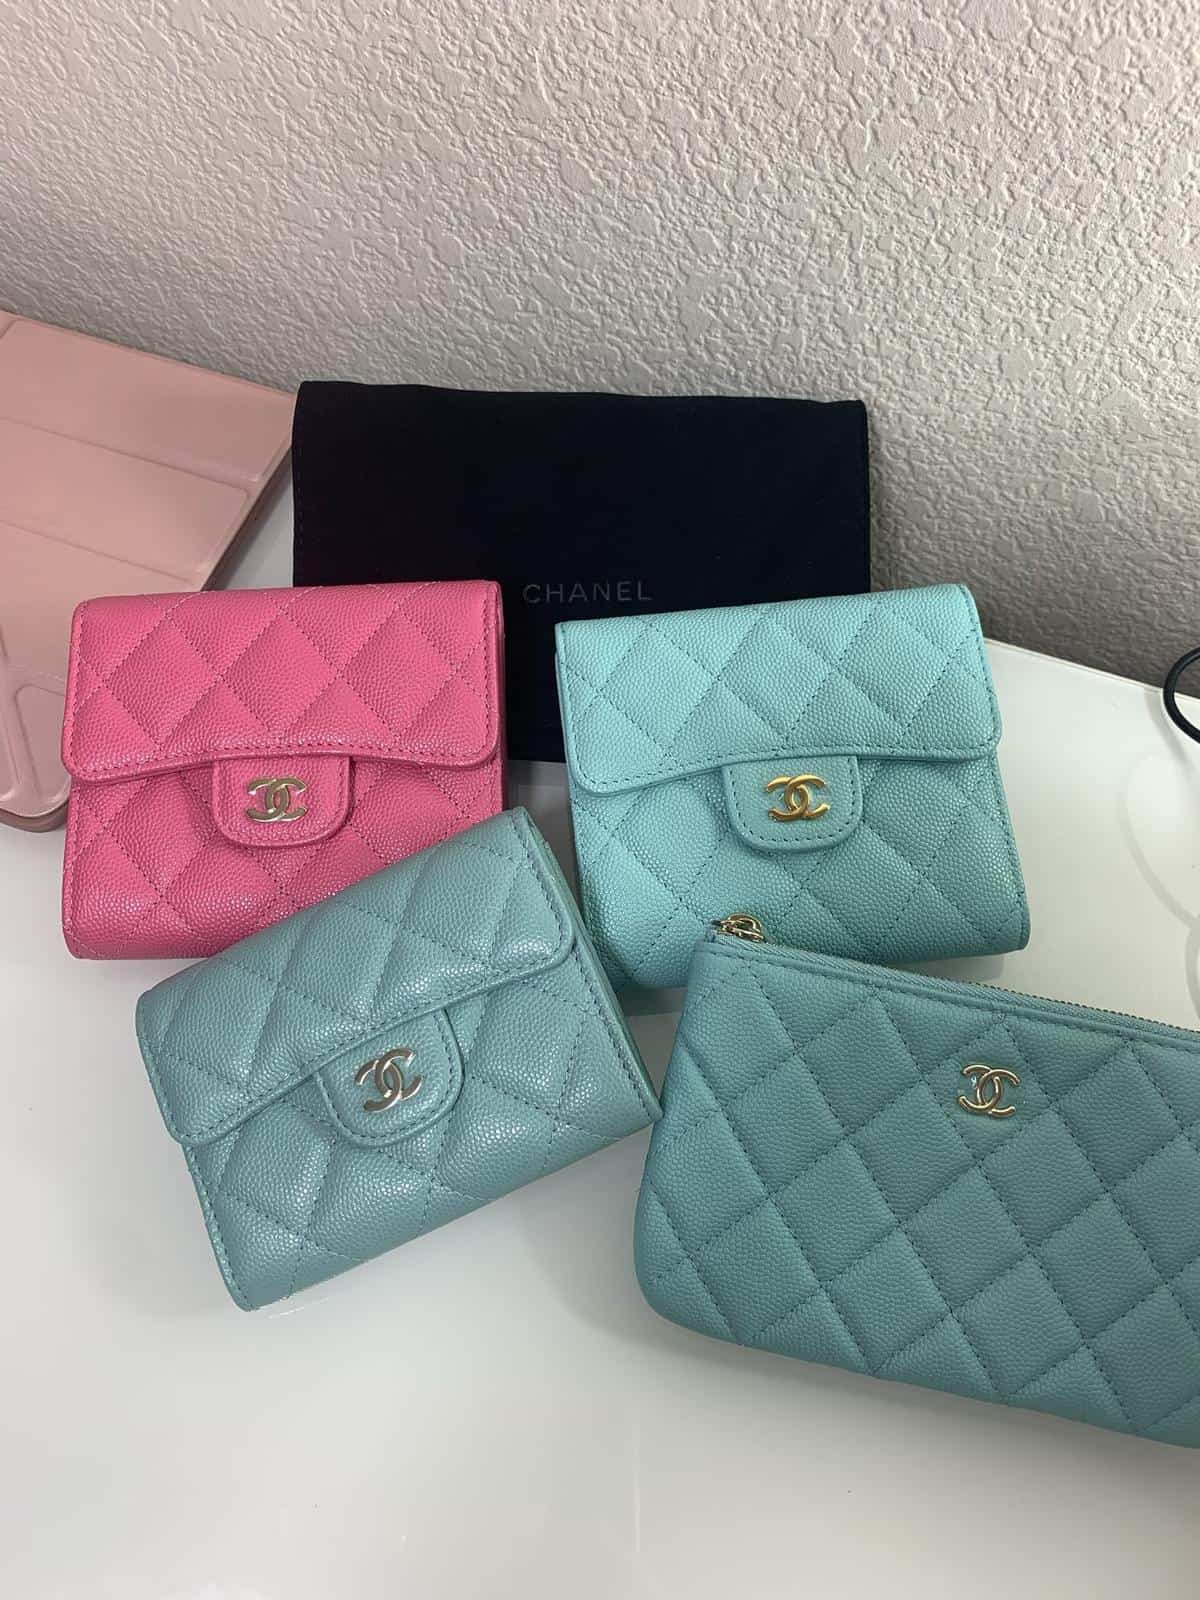 authentic chanel wallet